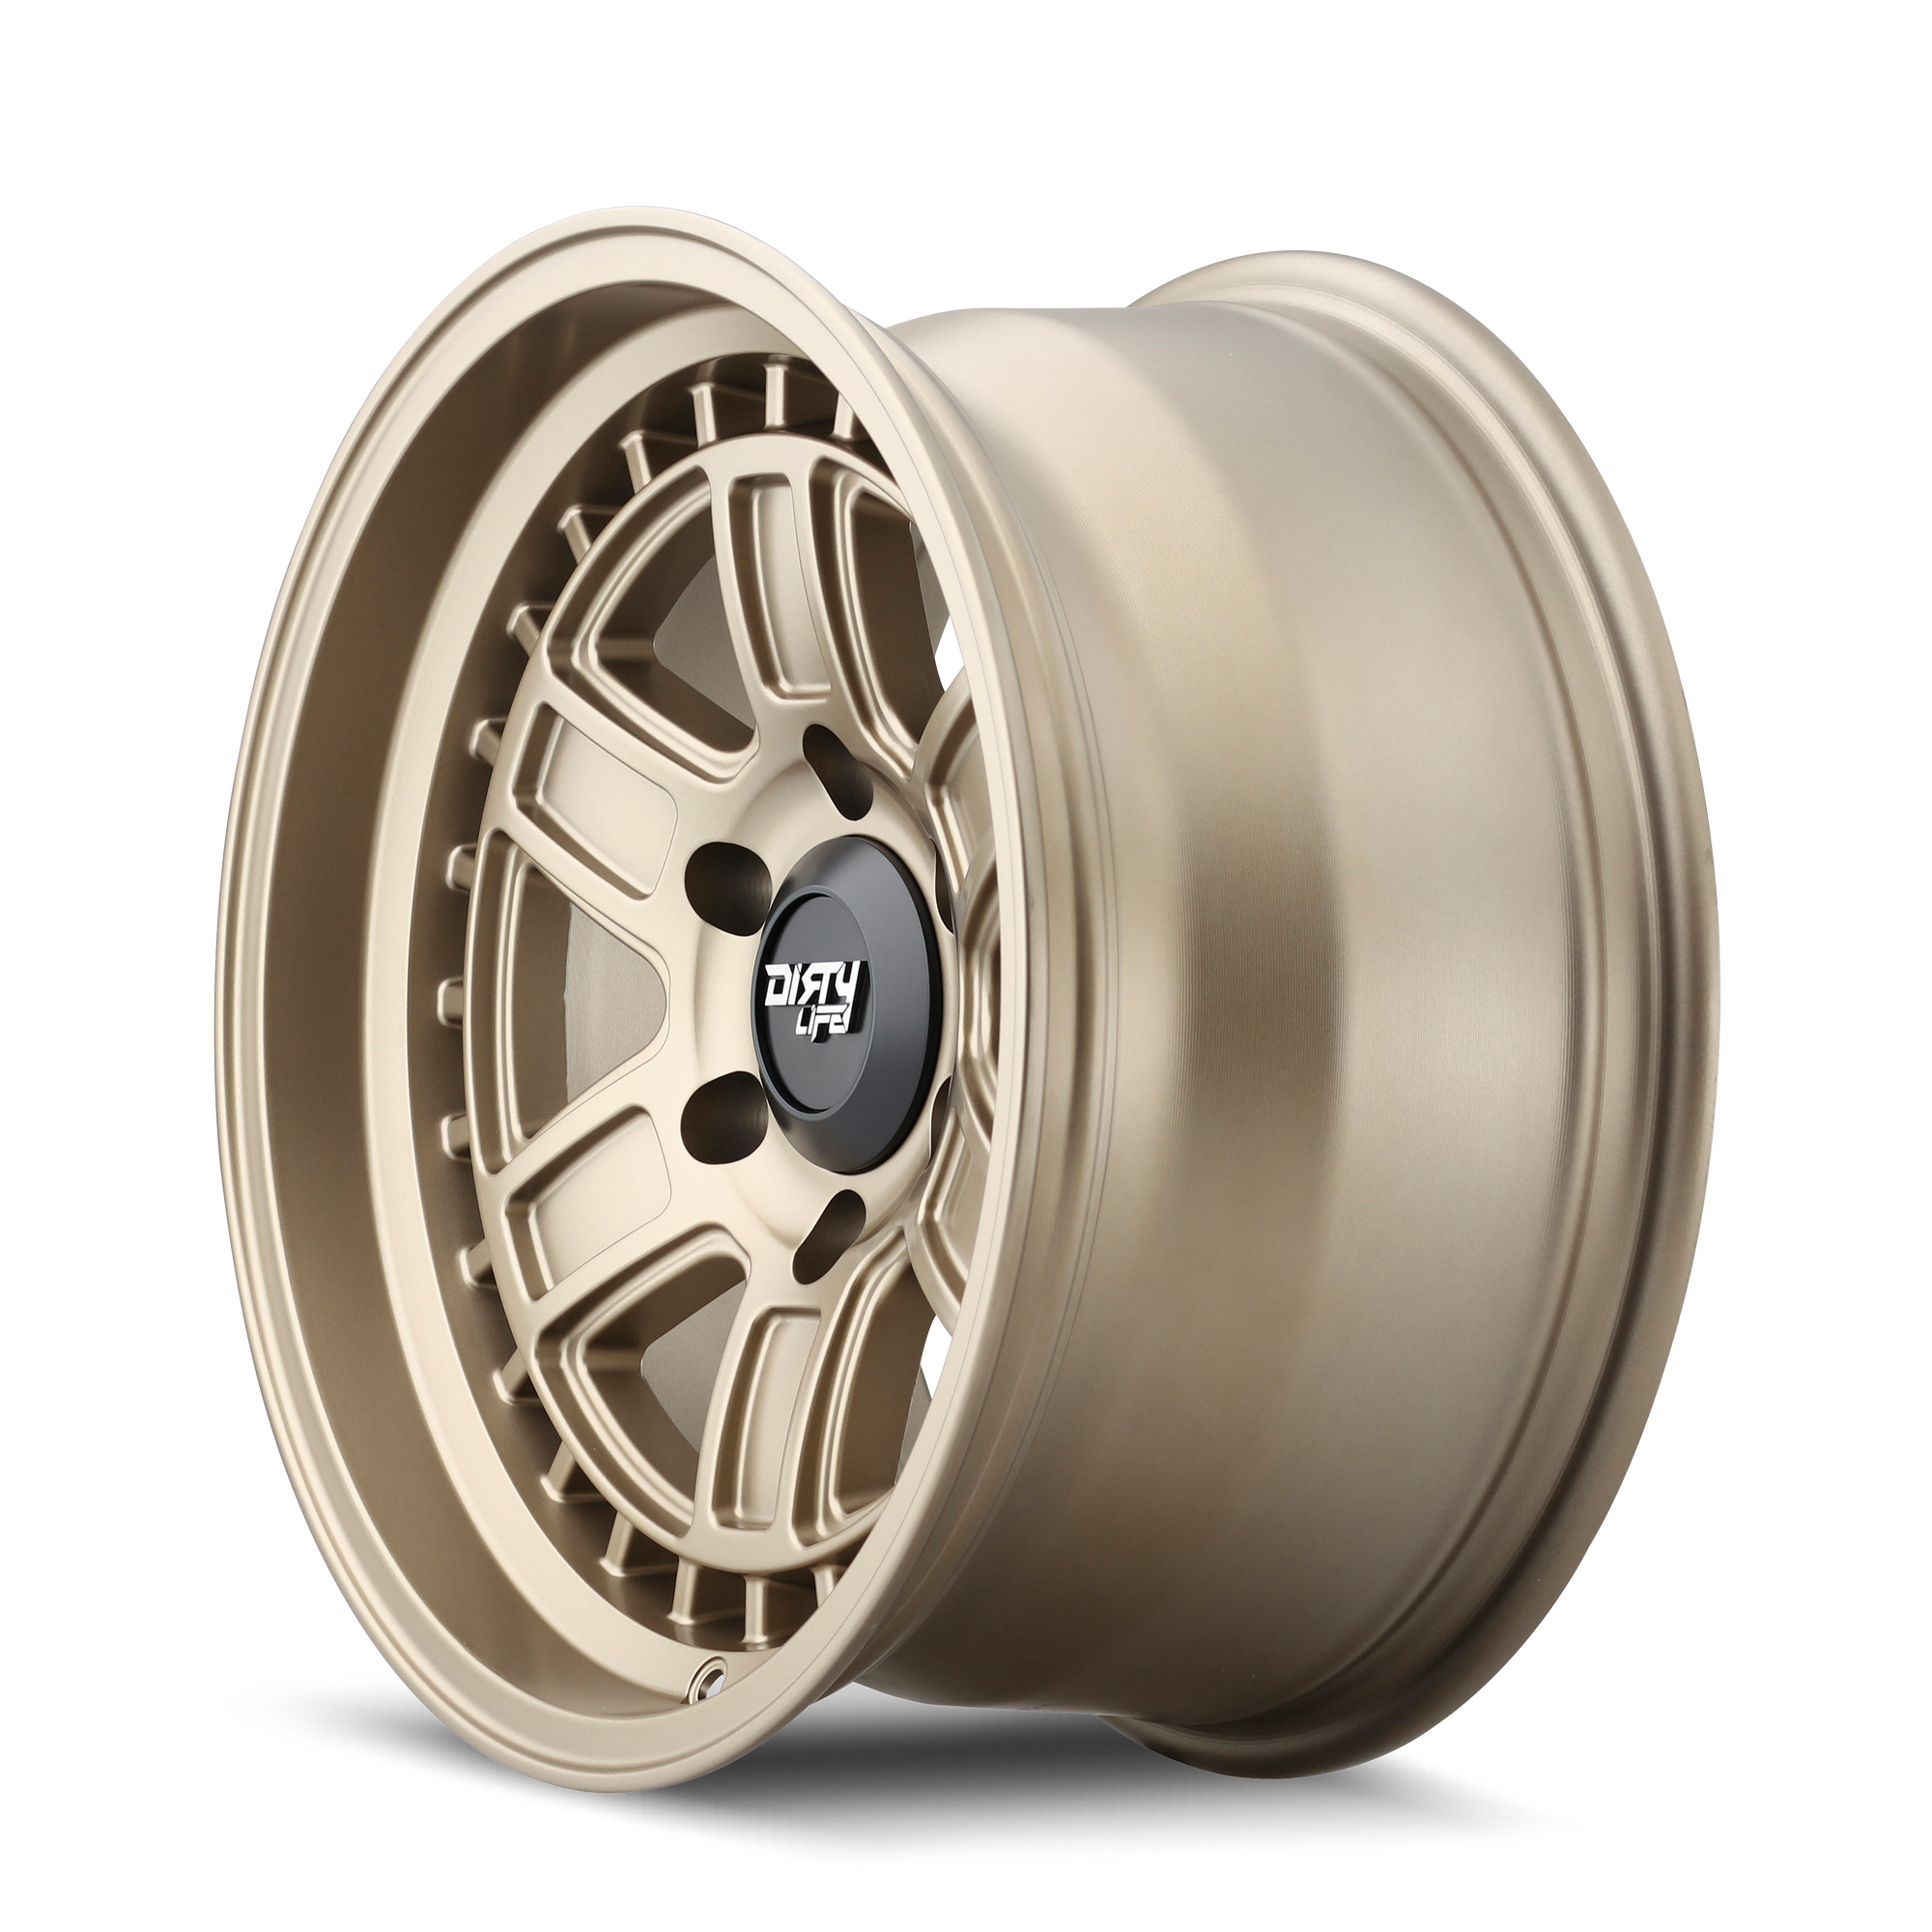 Dirty Life CAGE Matte gold 17x8.5 -6 6x139.7mm 106mm